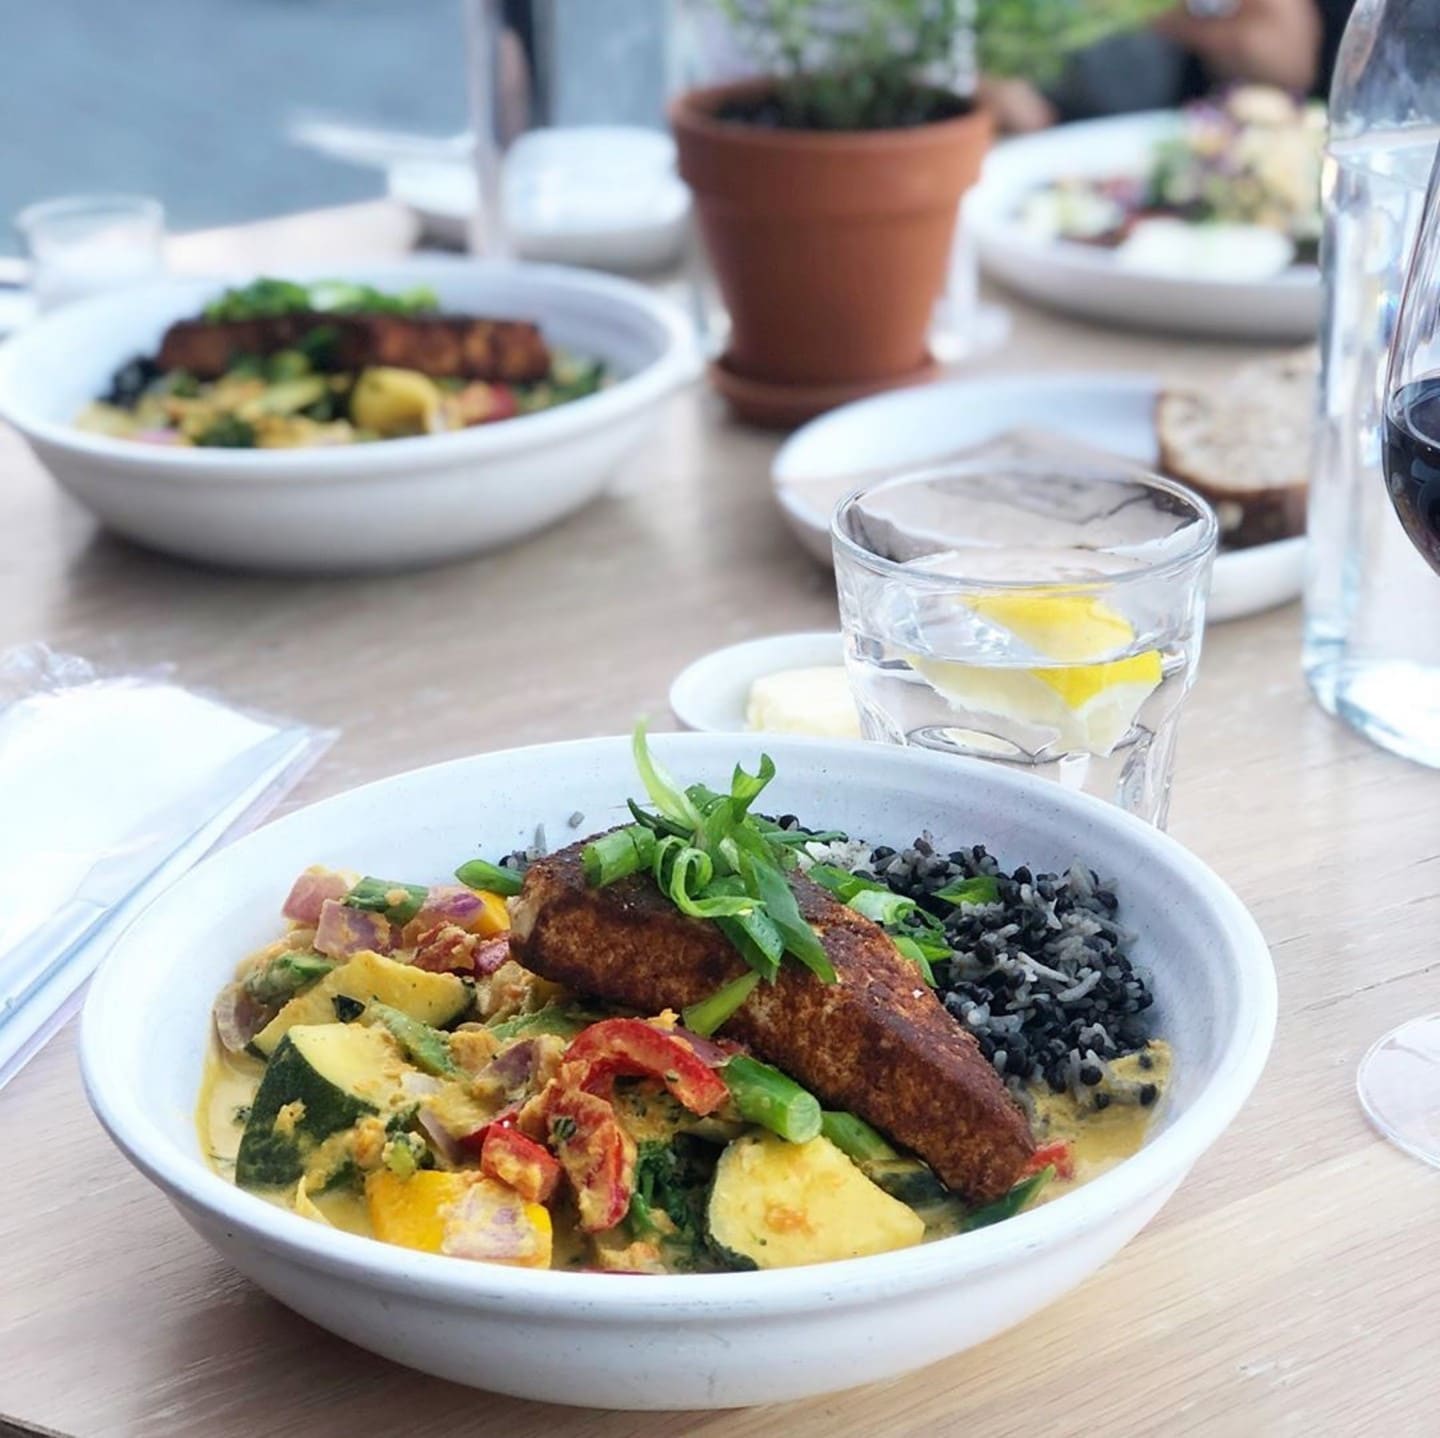 We see you, fall—and we raise you a delicious plate of vegan coconut curry at @malibufarmnewyork. 📸: @happyhydratedhealthy